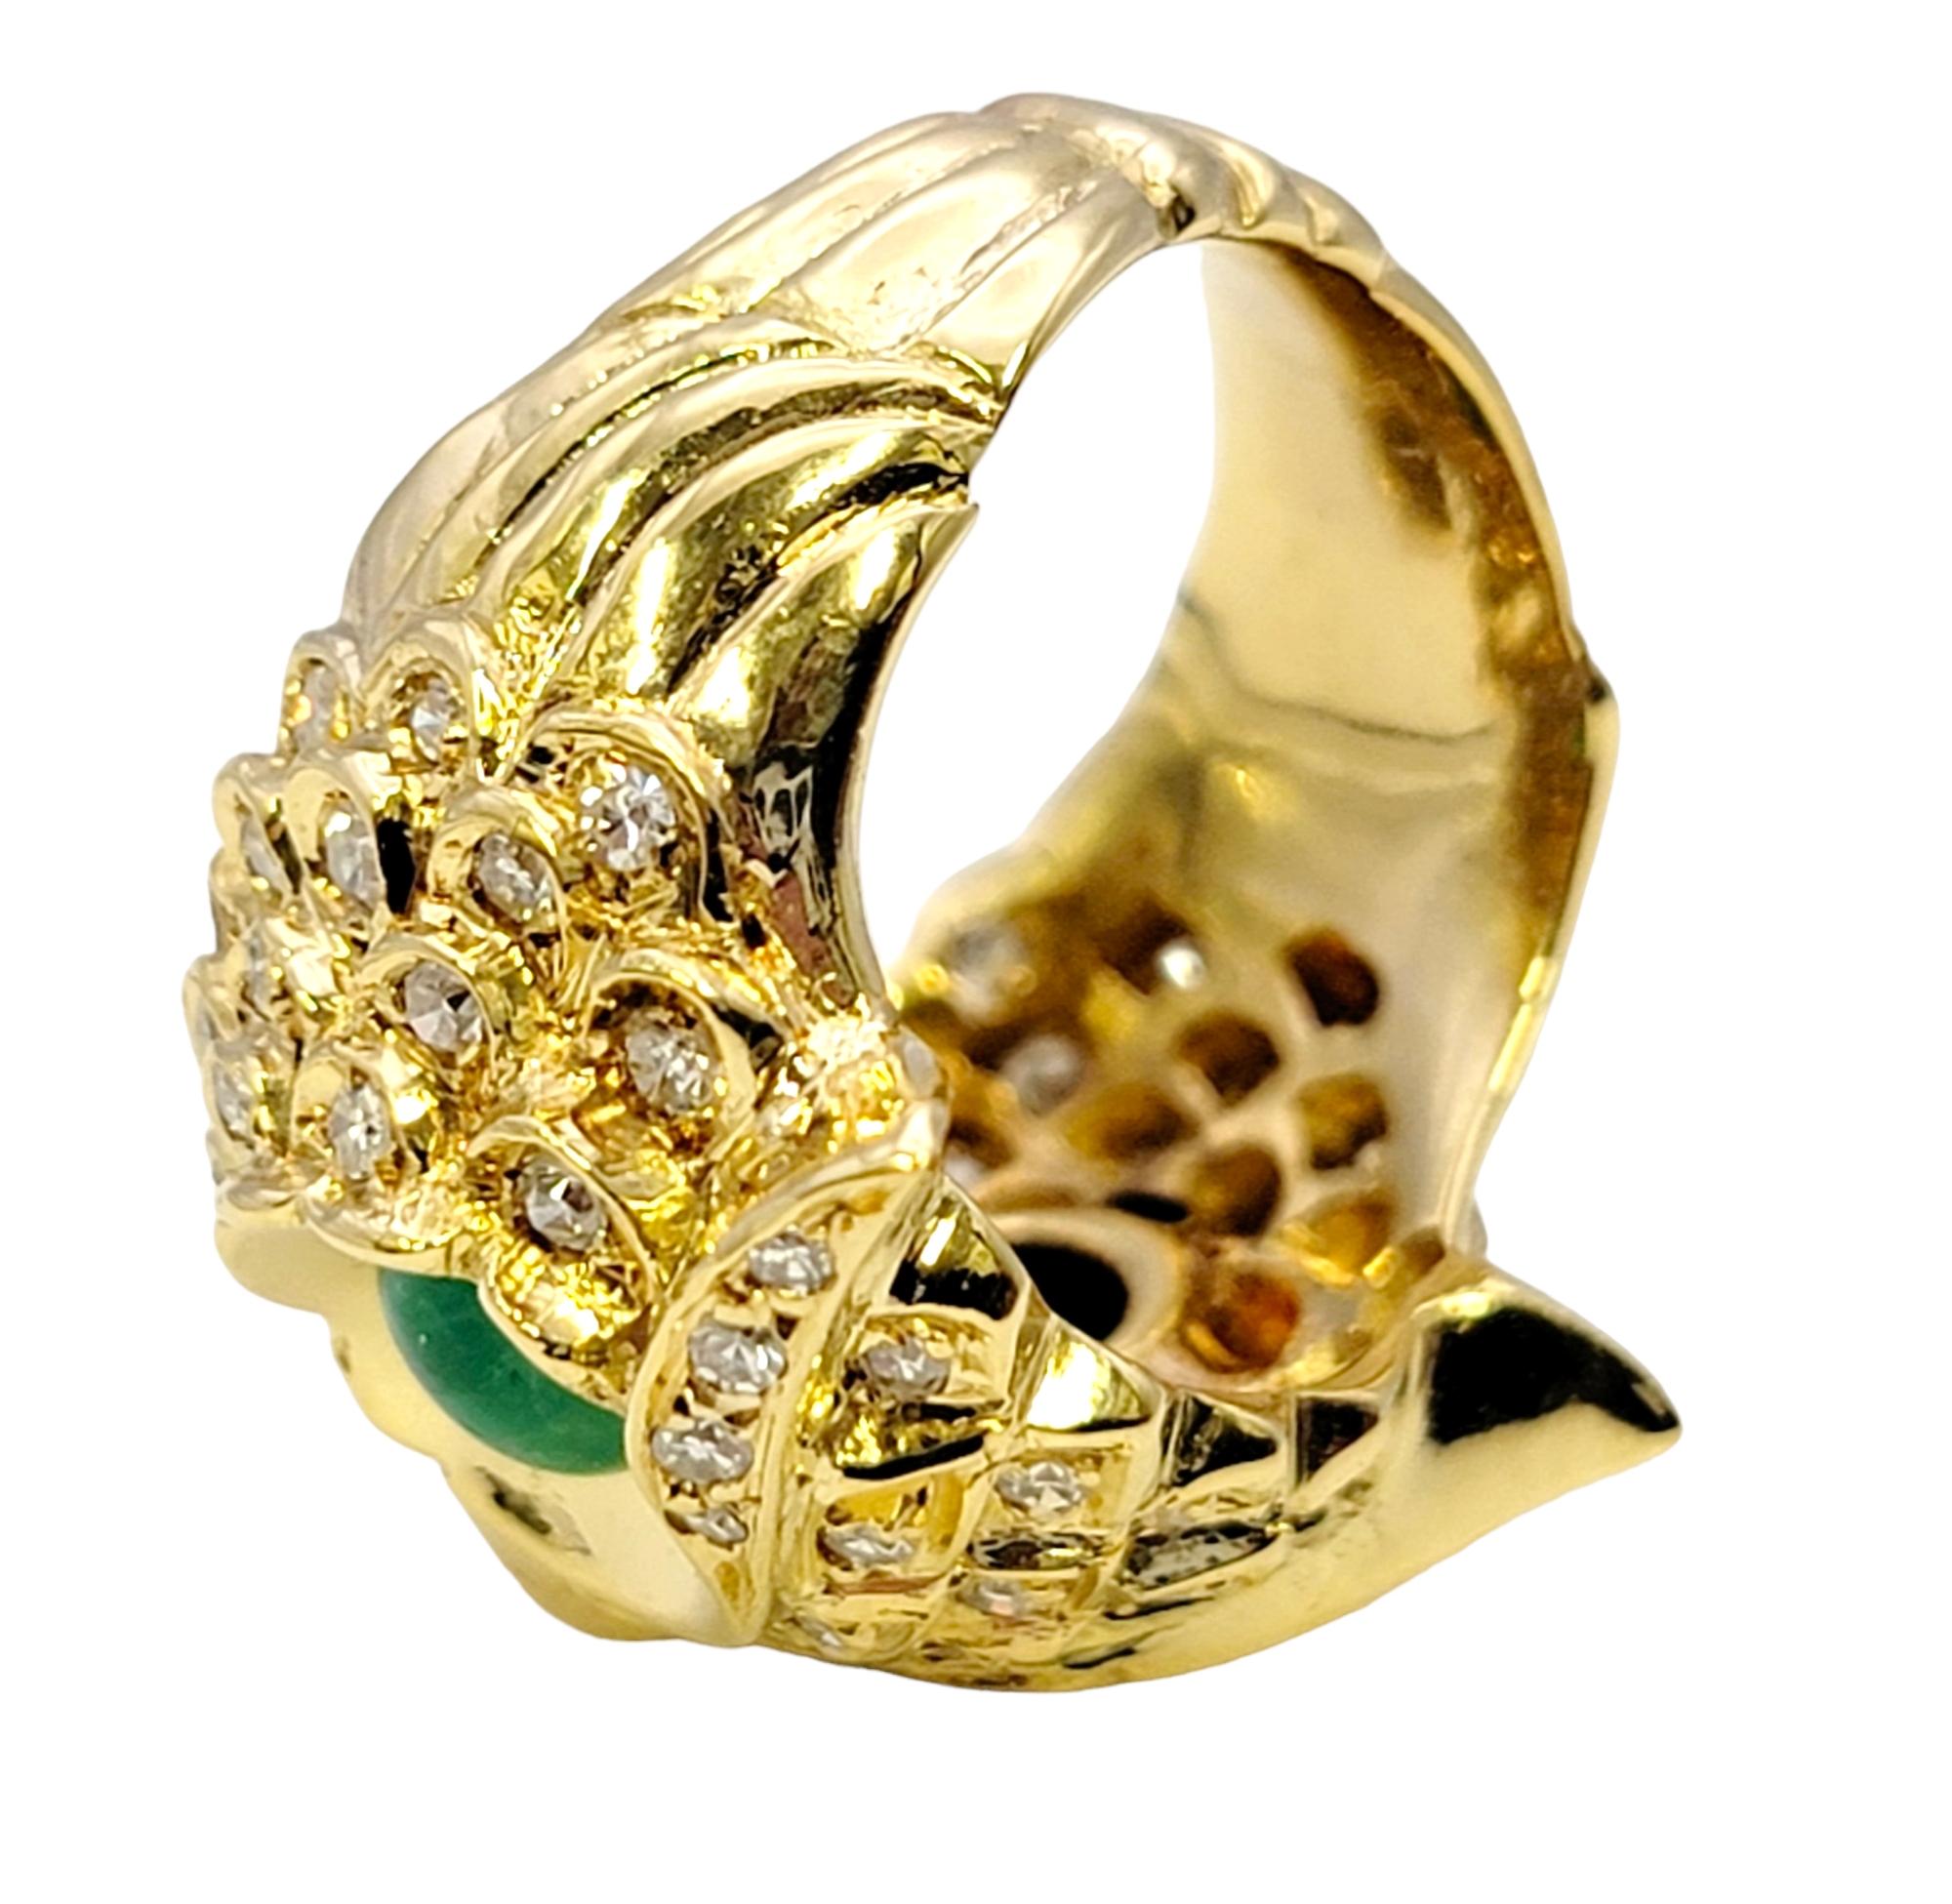 Diamond Embellished Owl Ring with Cabochon Emerald Eyes in 14 Karat Yellow Gold For Sale 1